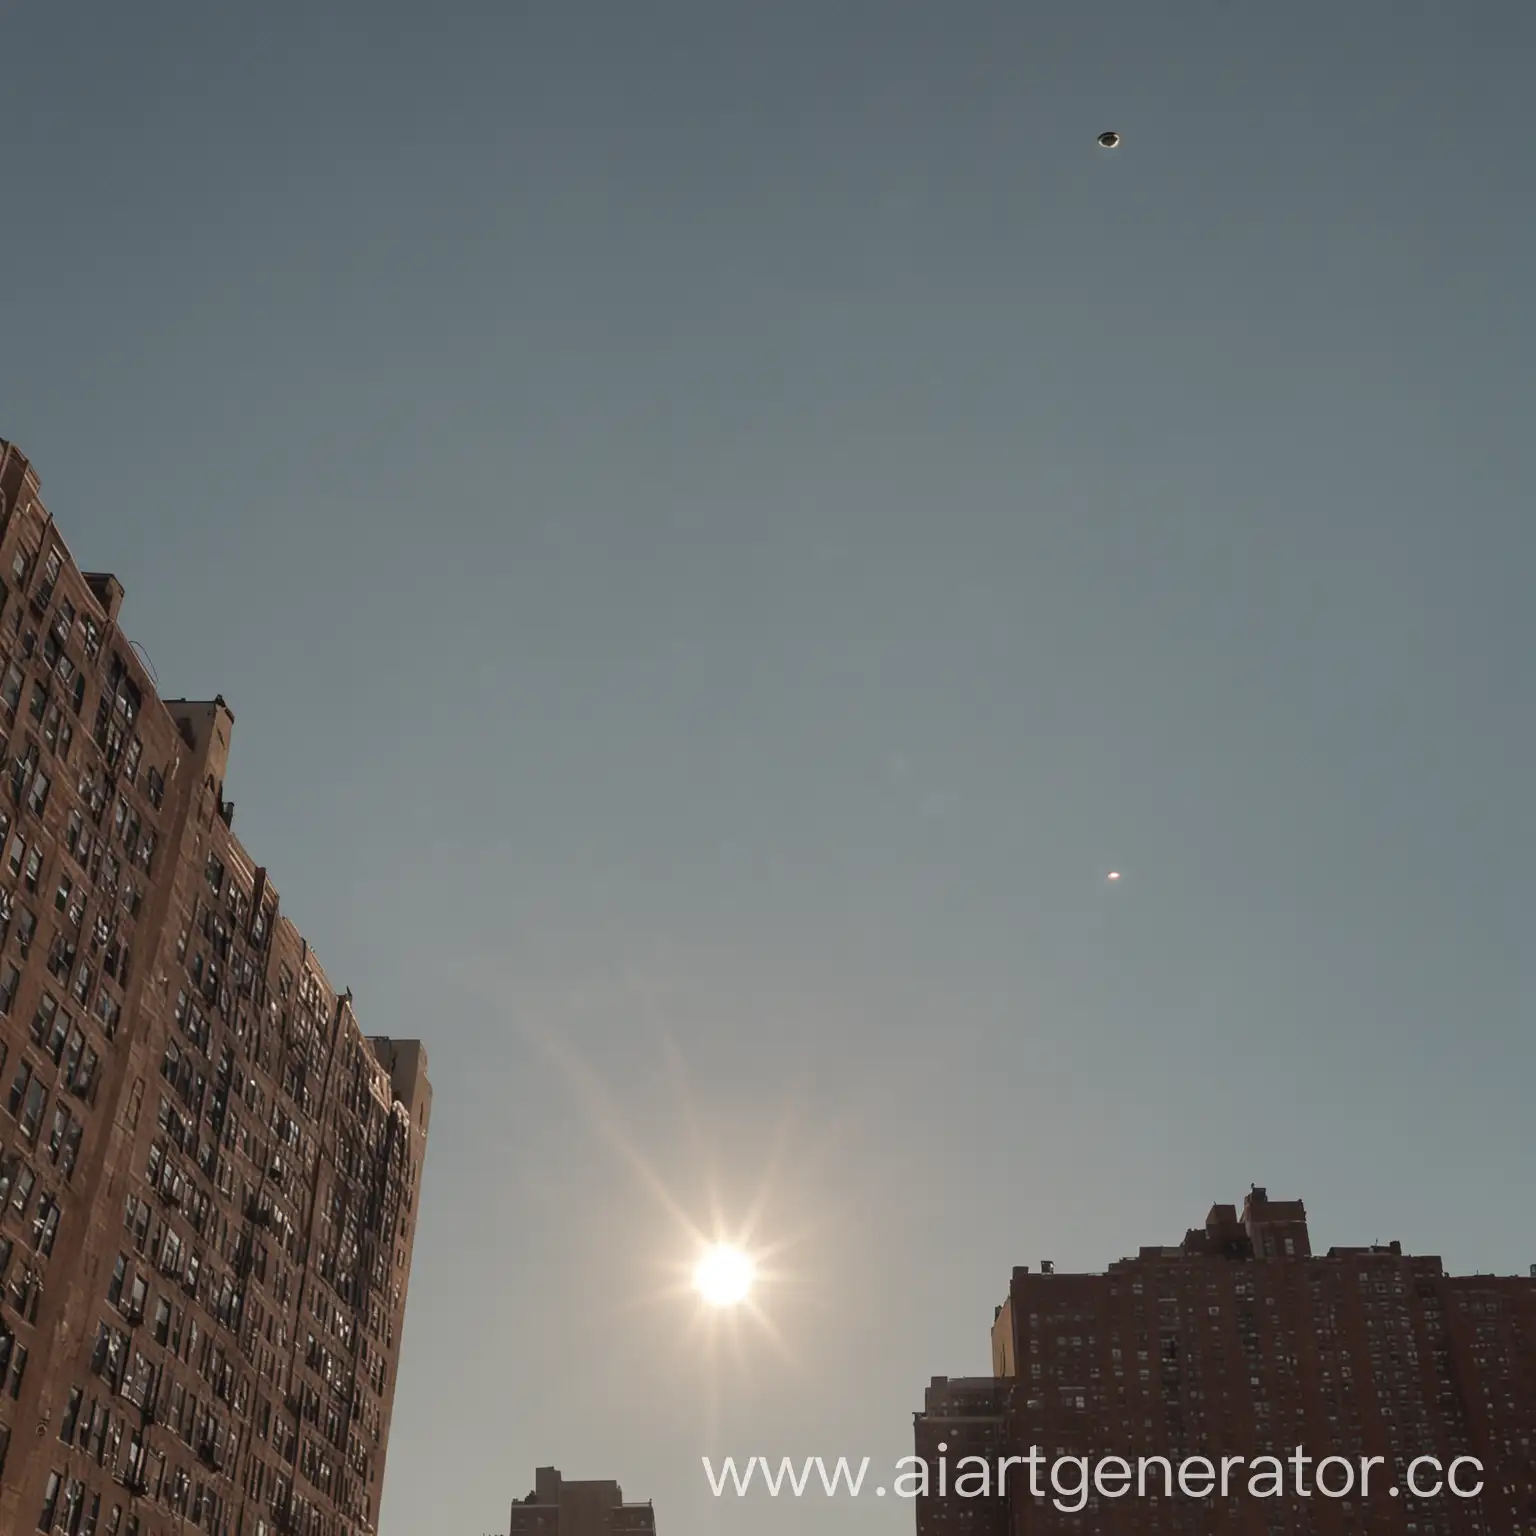 tiny UFO in sky Bronx morning looking up tall buildings